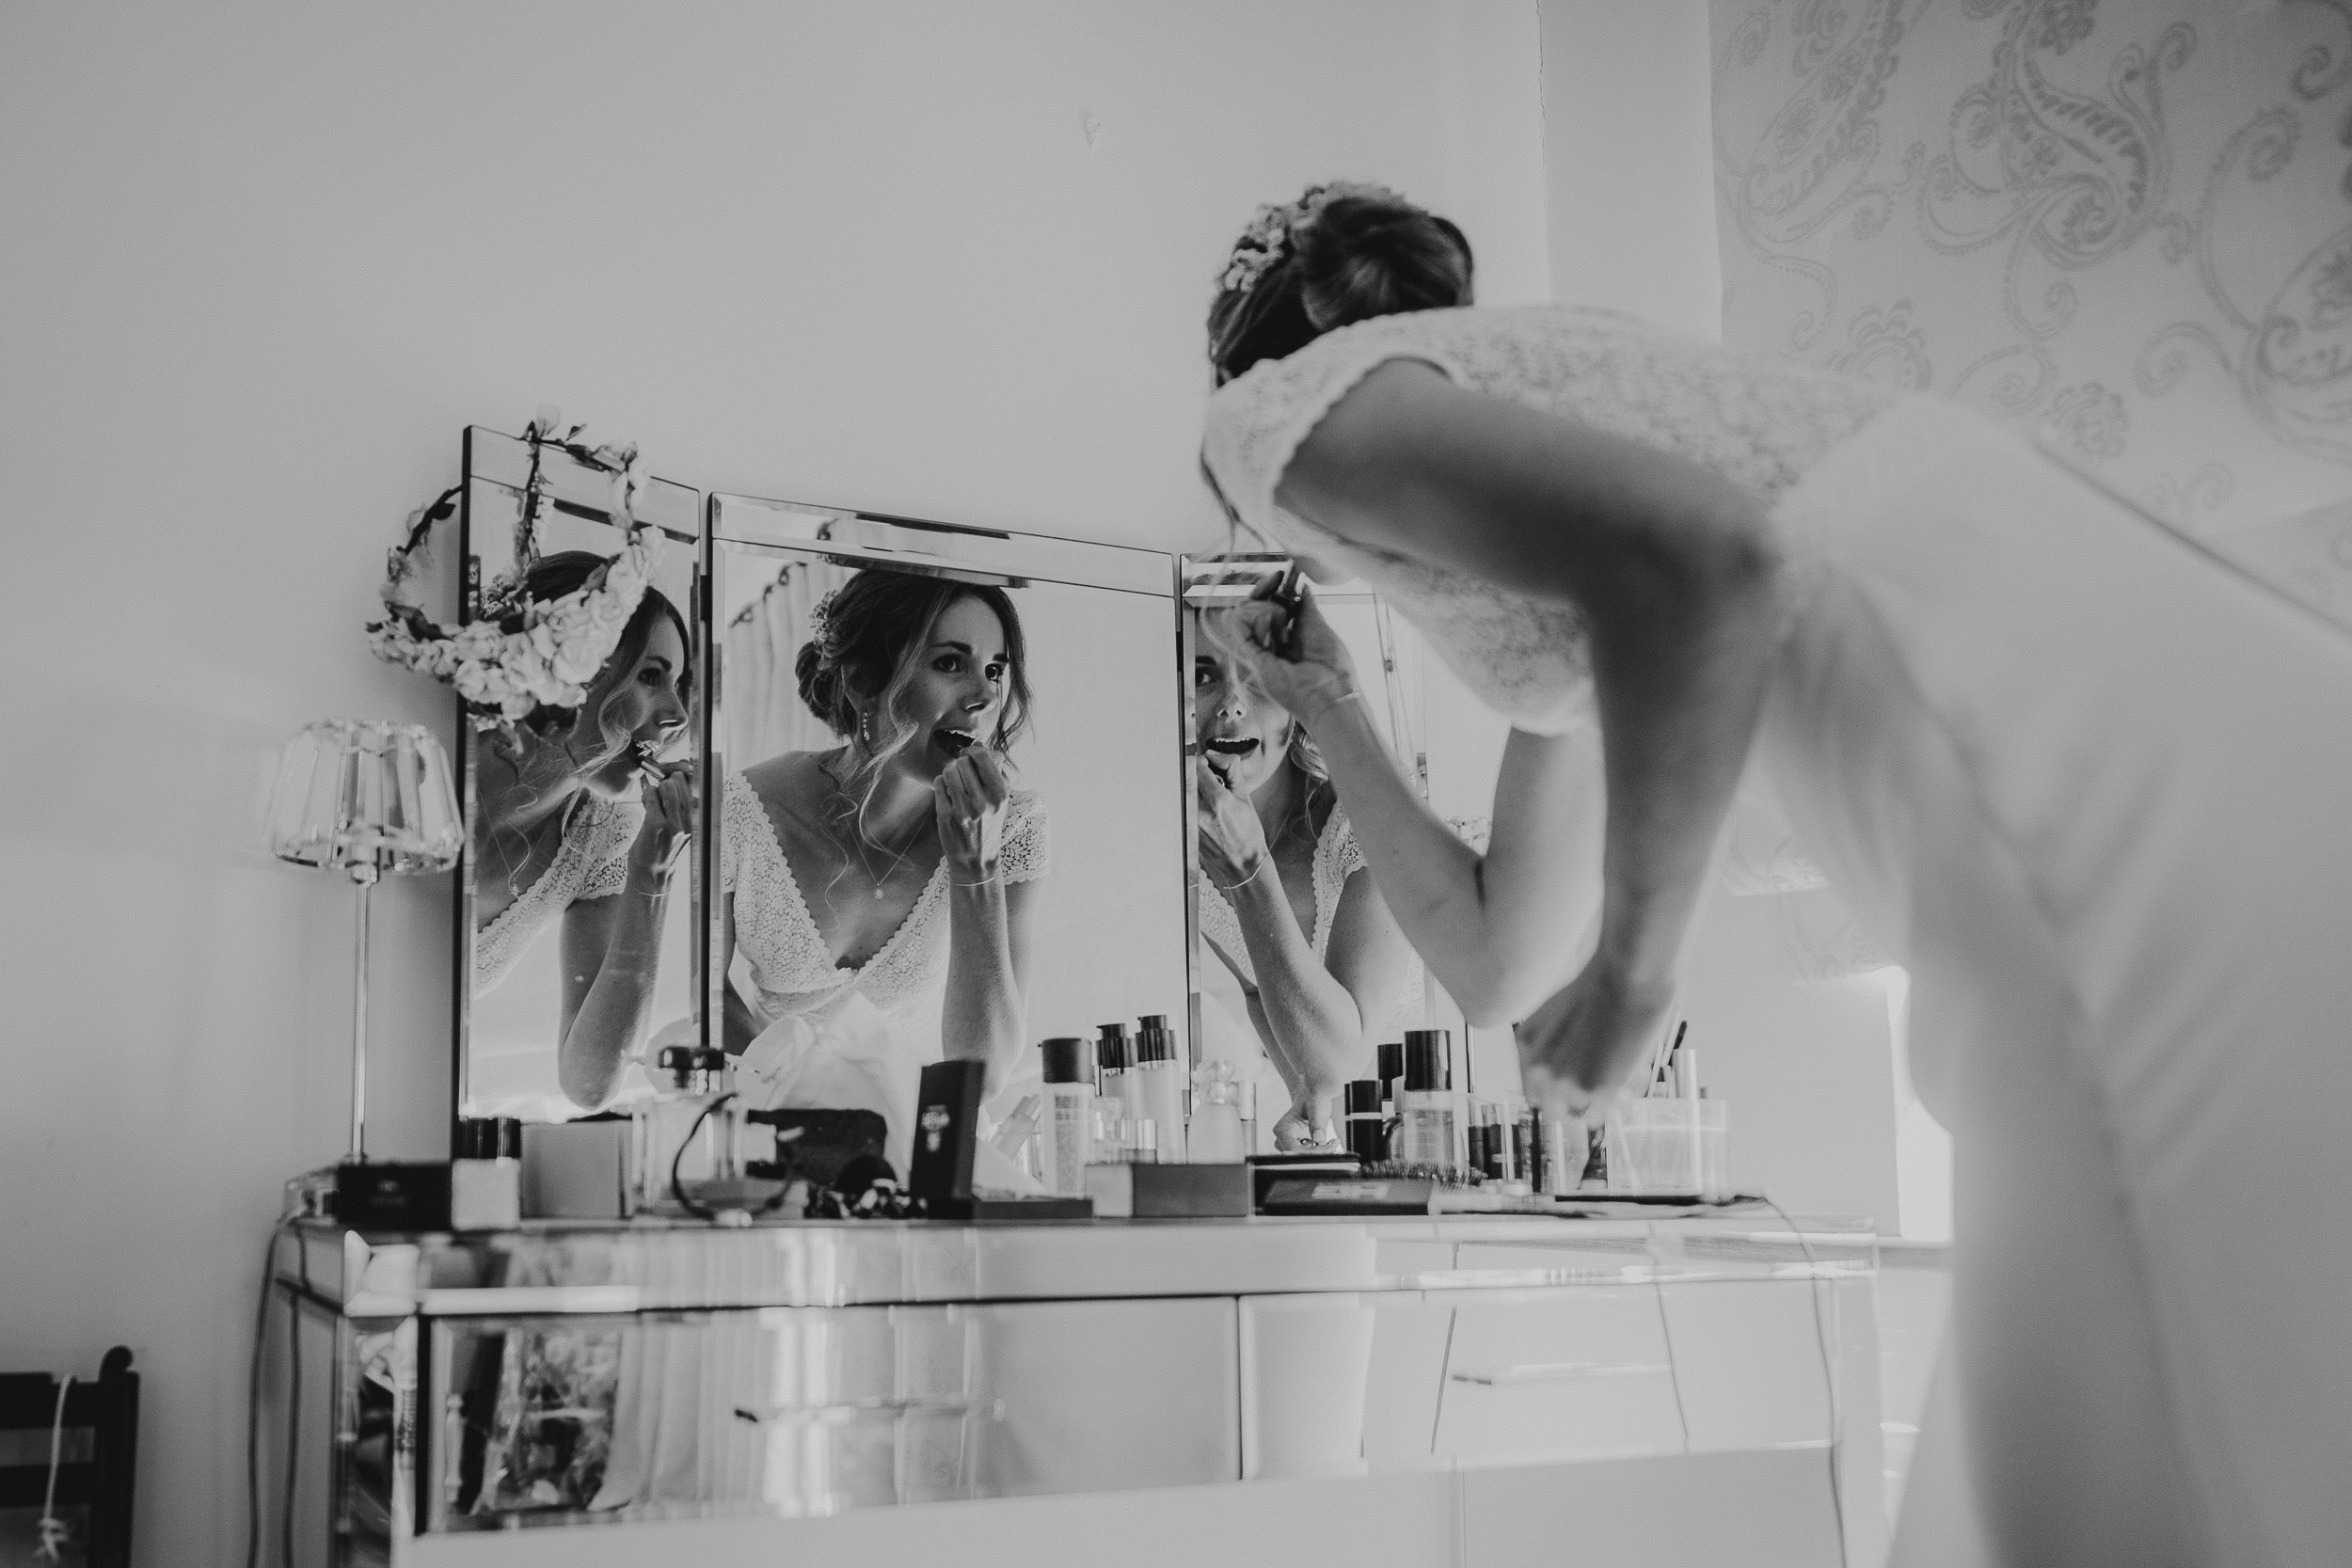 A bride preparing for her wedding, captured in a photo by the wedding photographer.